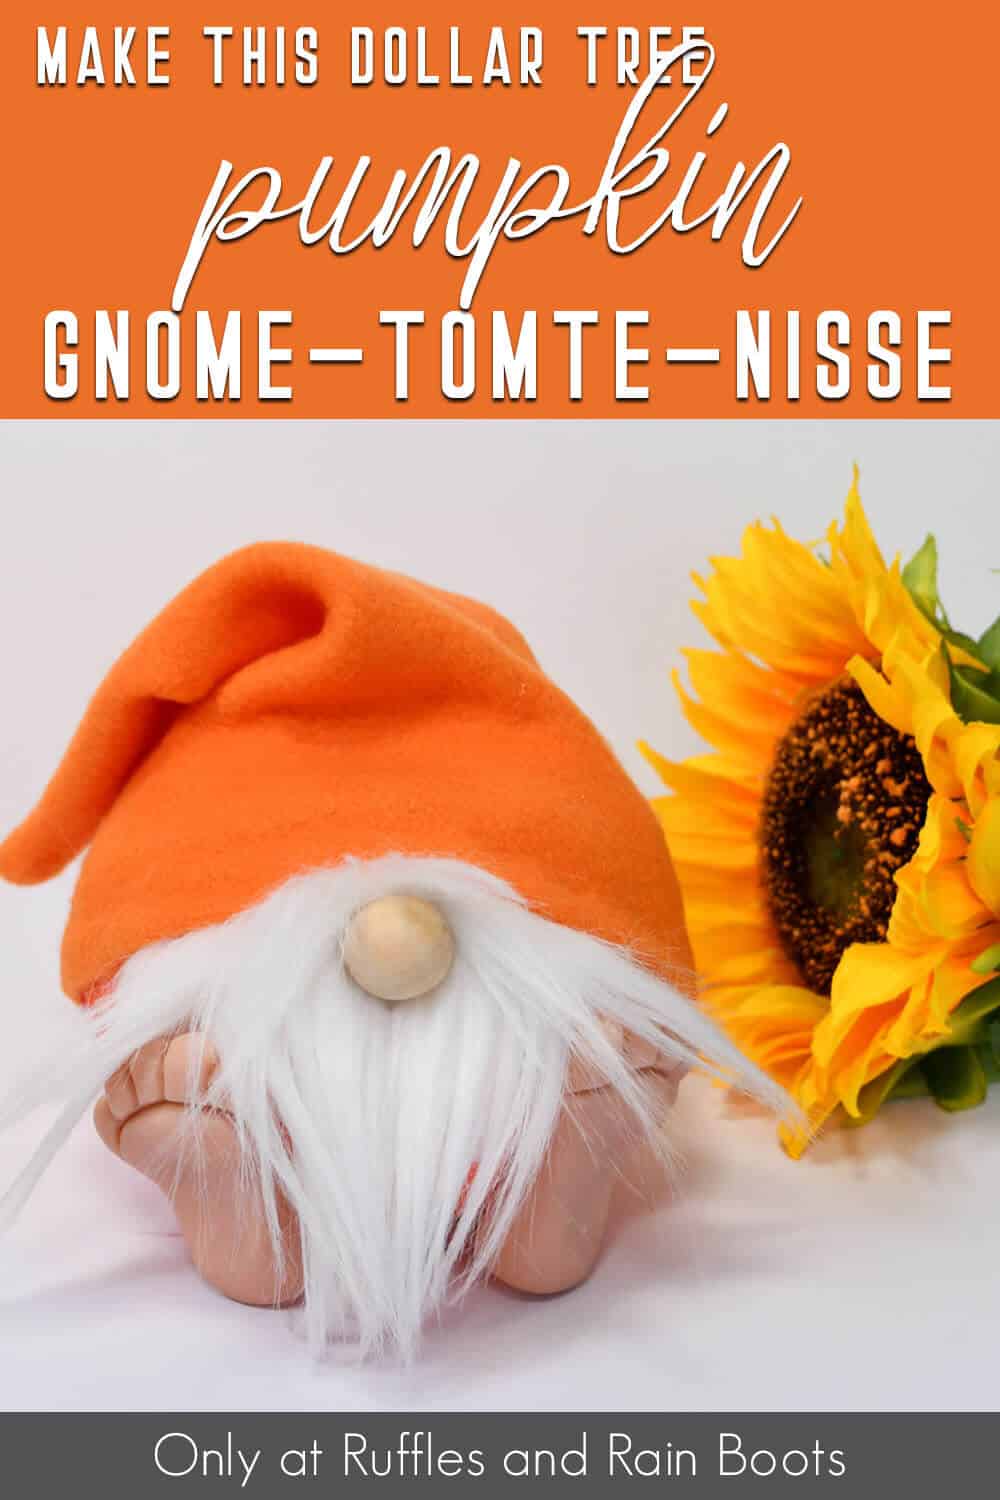 dollar tree craft pumpkin gnome with feet with text which reads make this dollar tree pumpkin gnome tomte nisse